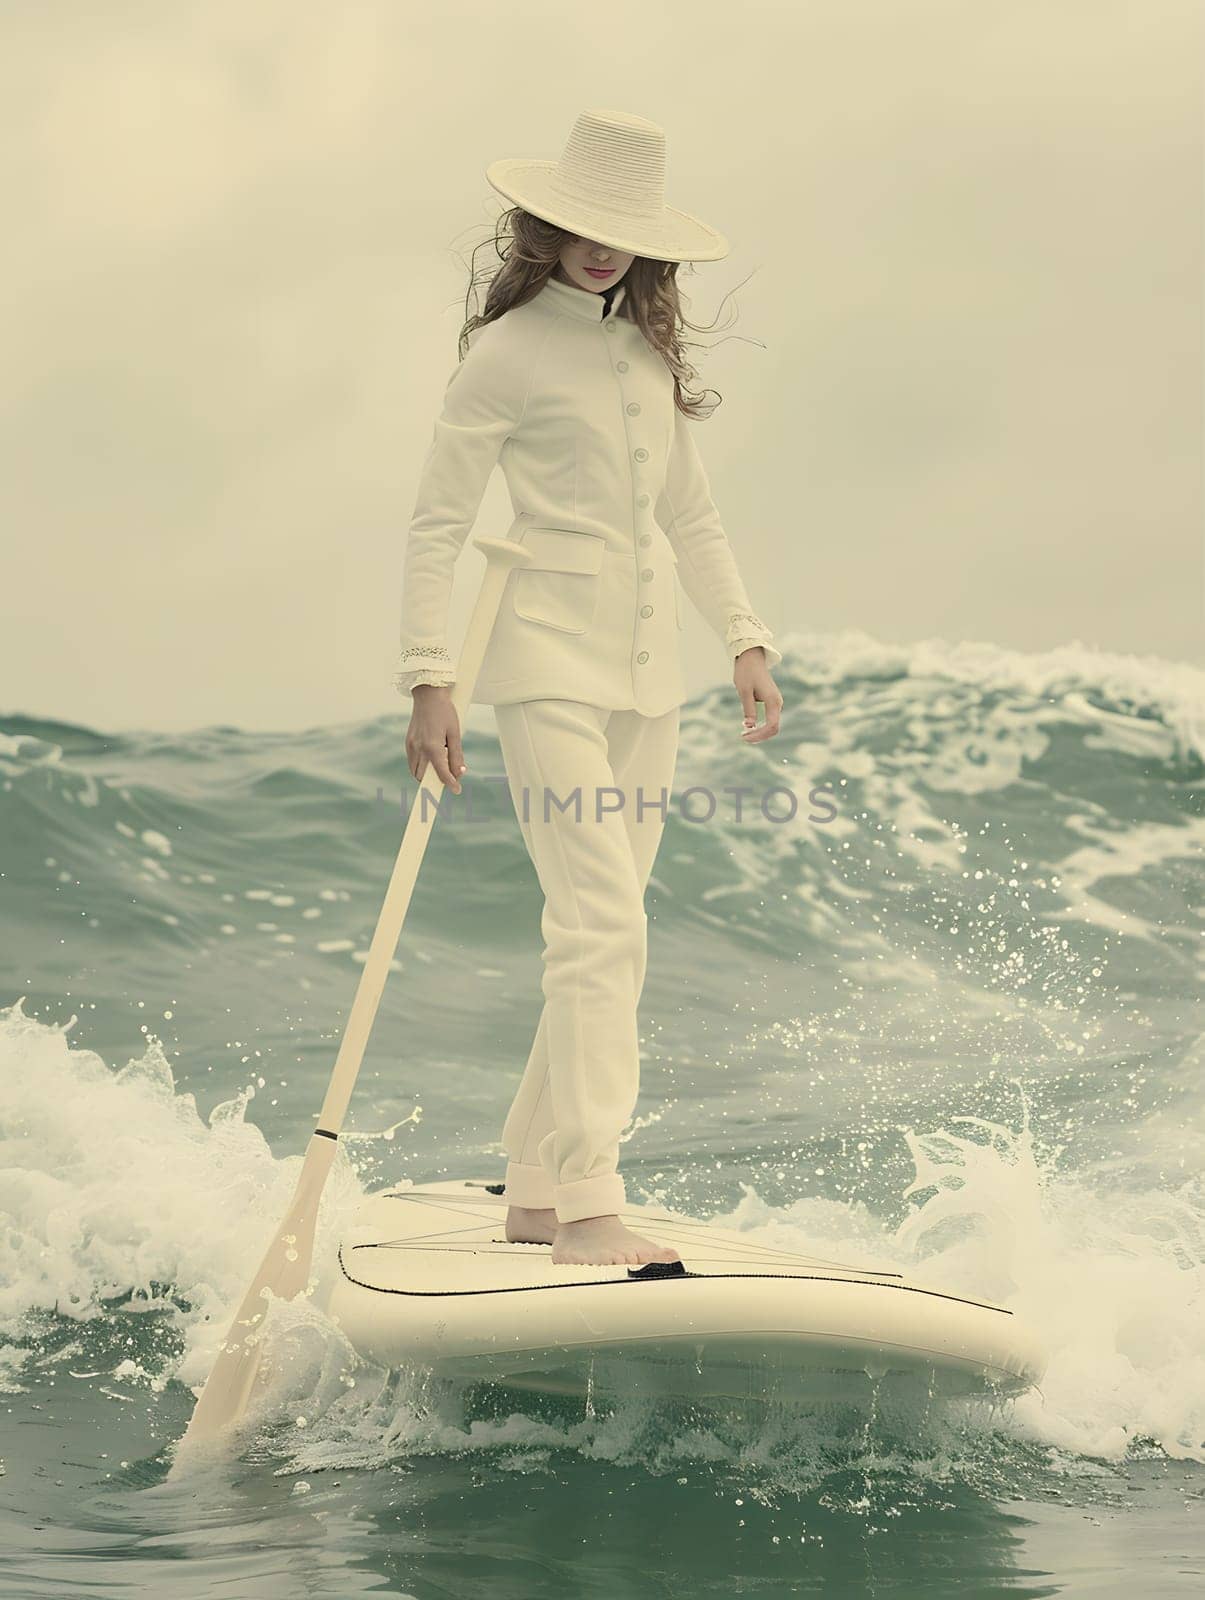 A woman in a white suit gracefully rides a powerful wind wave on her surfboard, skillfully maneuvering her legs to navigate the sloping landscape of the water